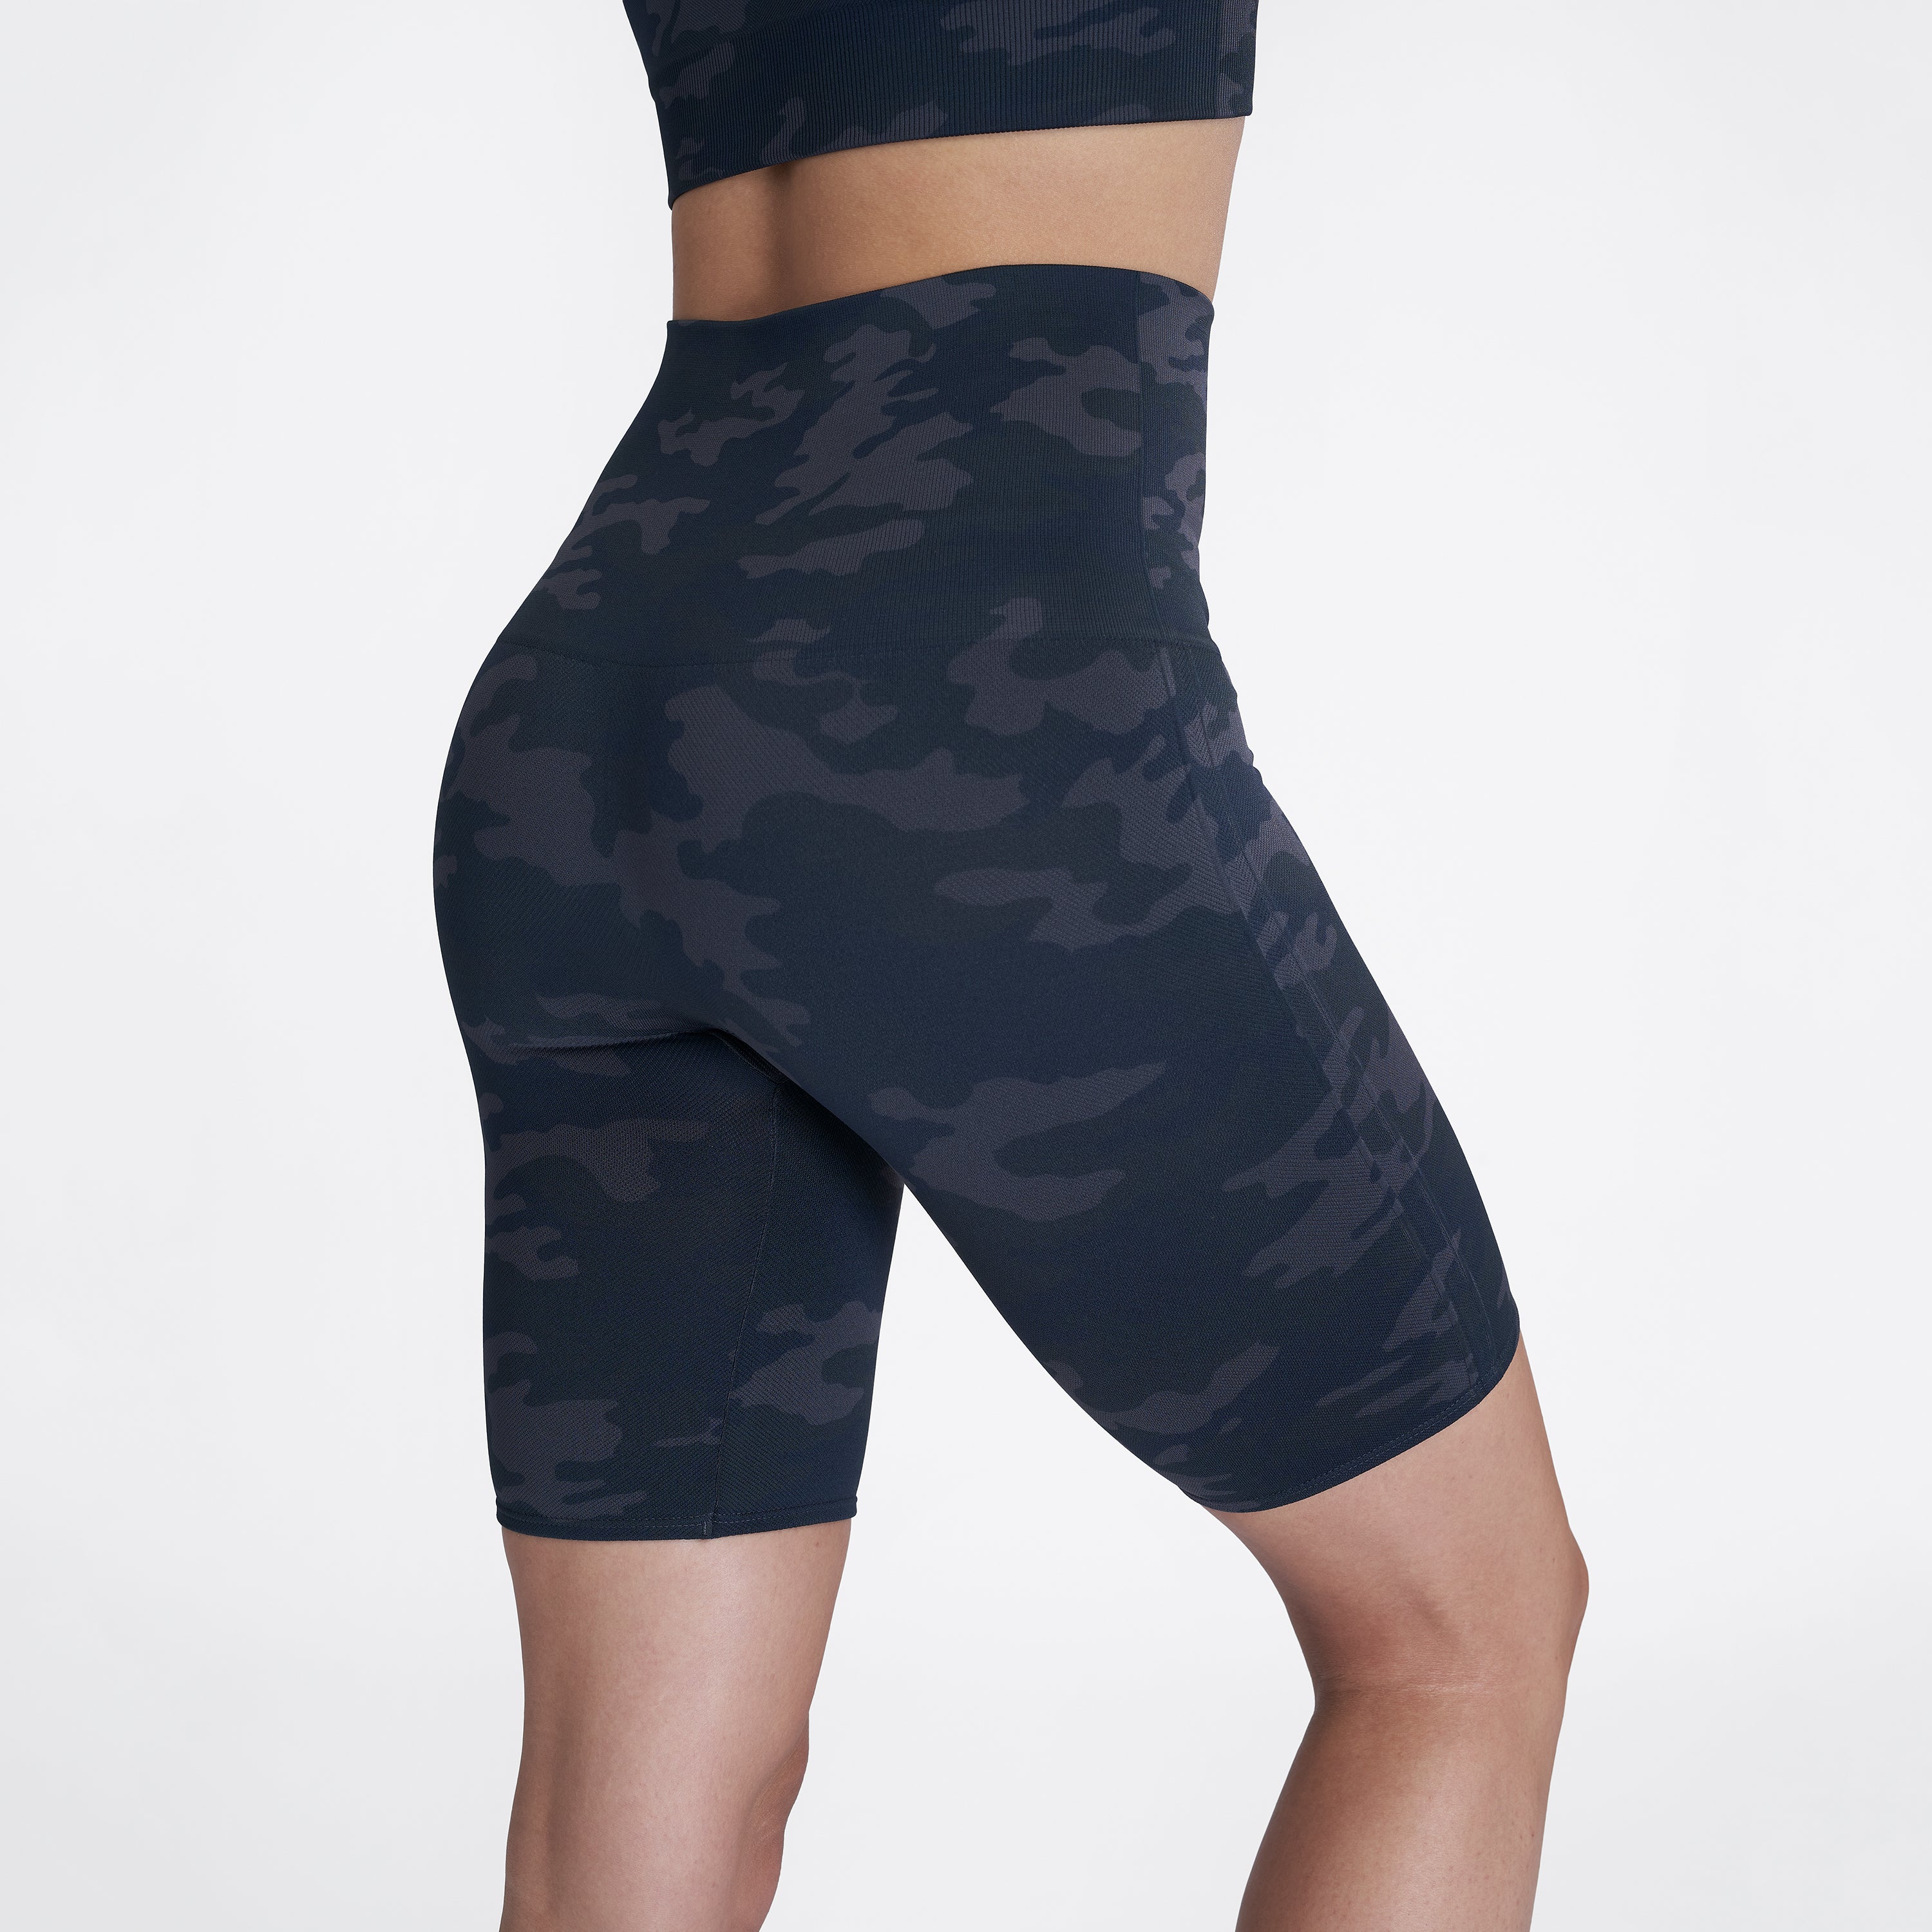 Spanx Look At Me Now Bike Short –